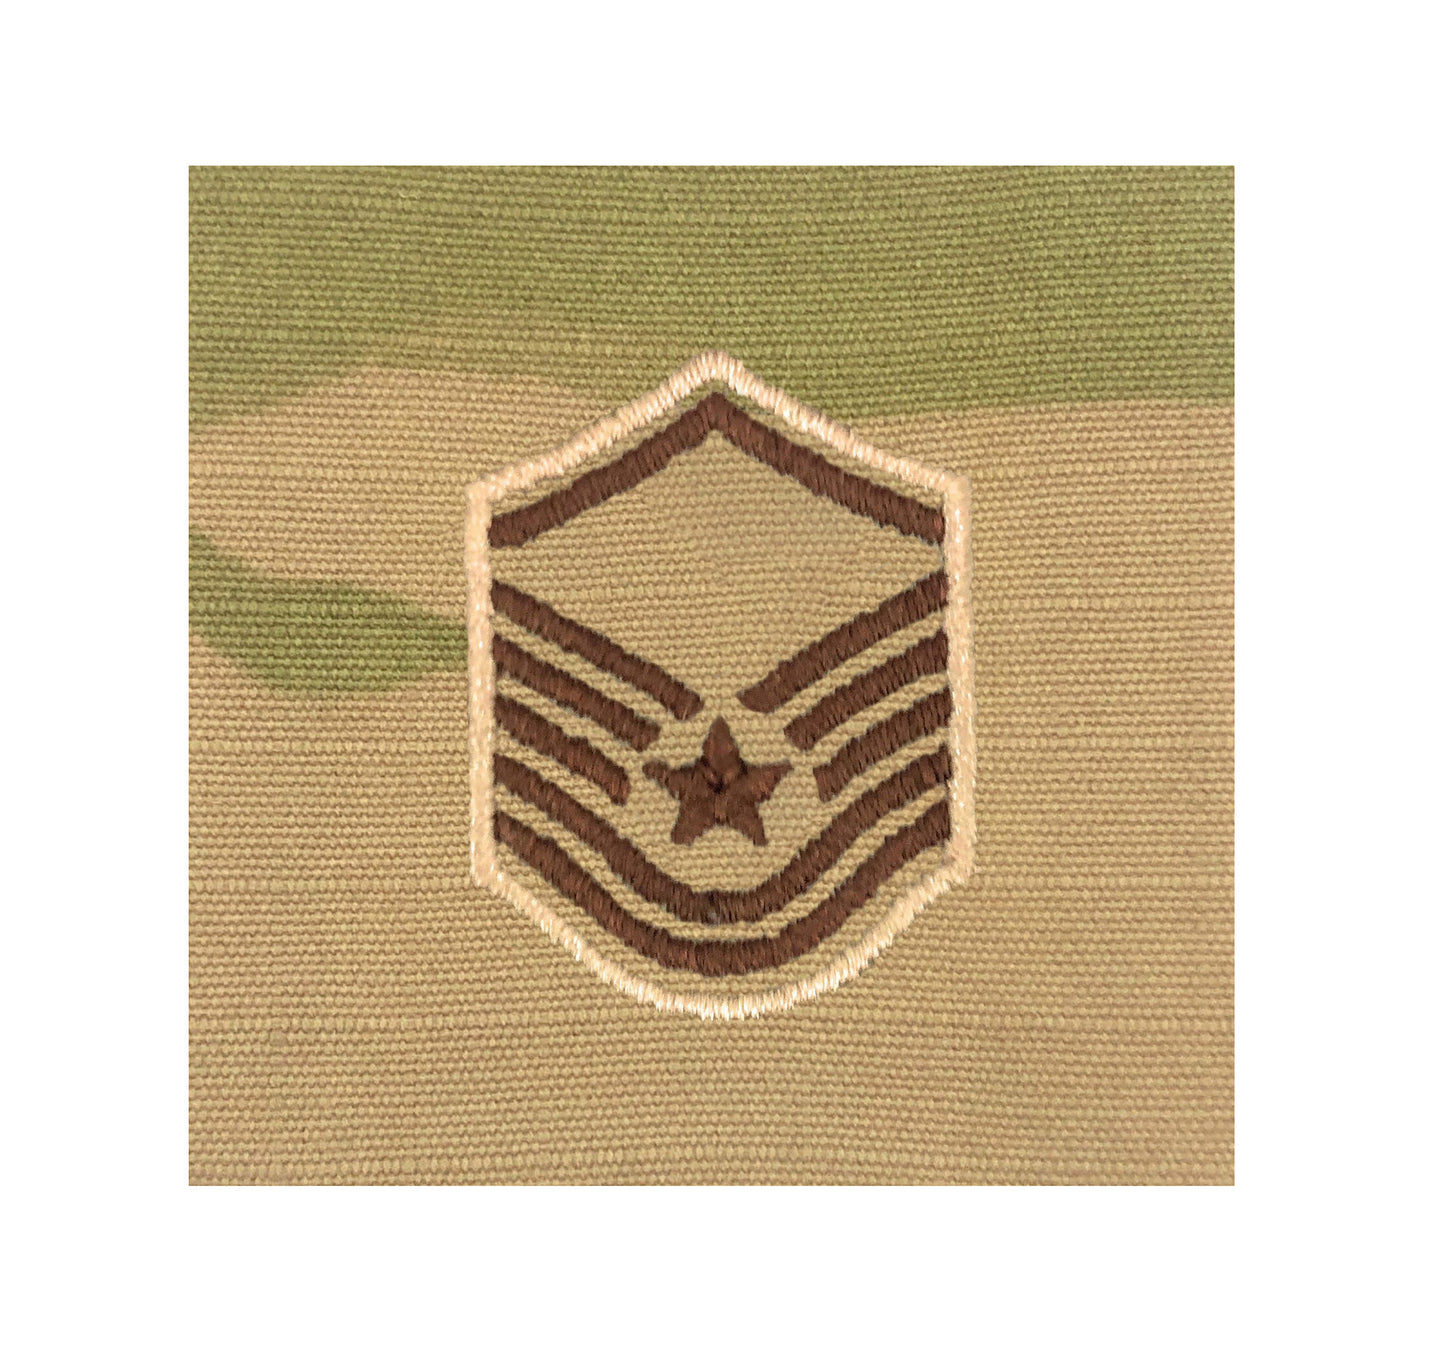 U.S. Air Force E7 Master Sergeant OCP Spice Brown Sew-On Rank For Shirt, Jacket, Coat